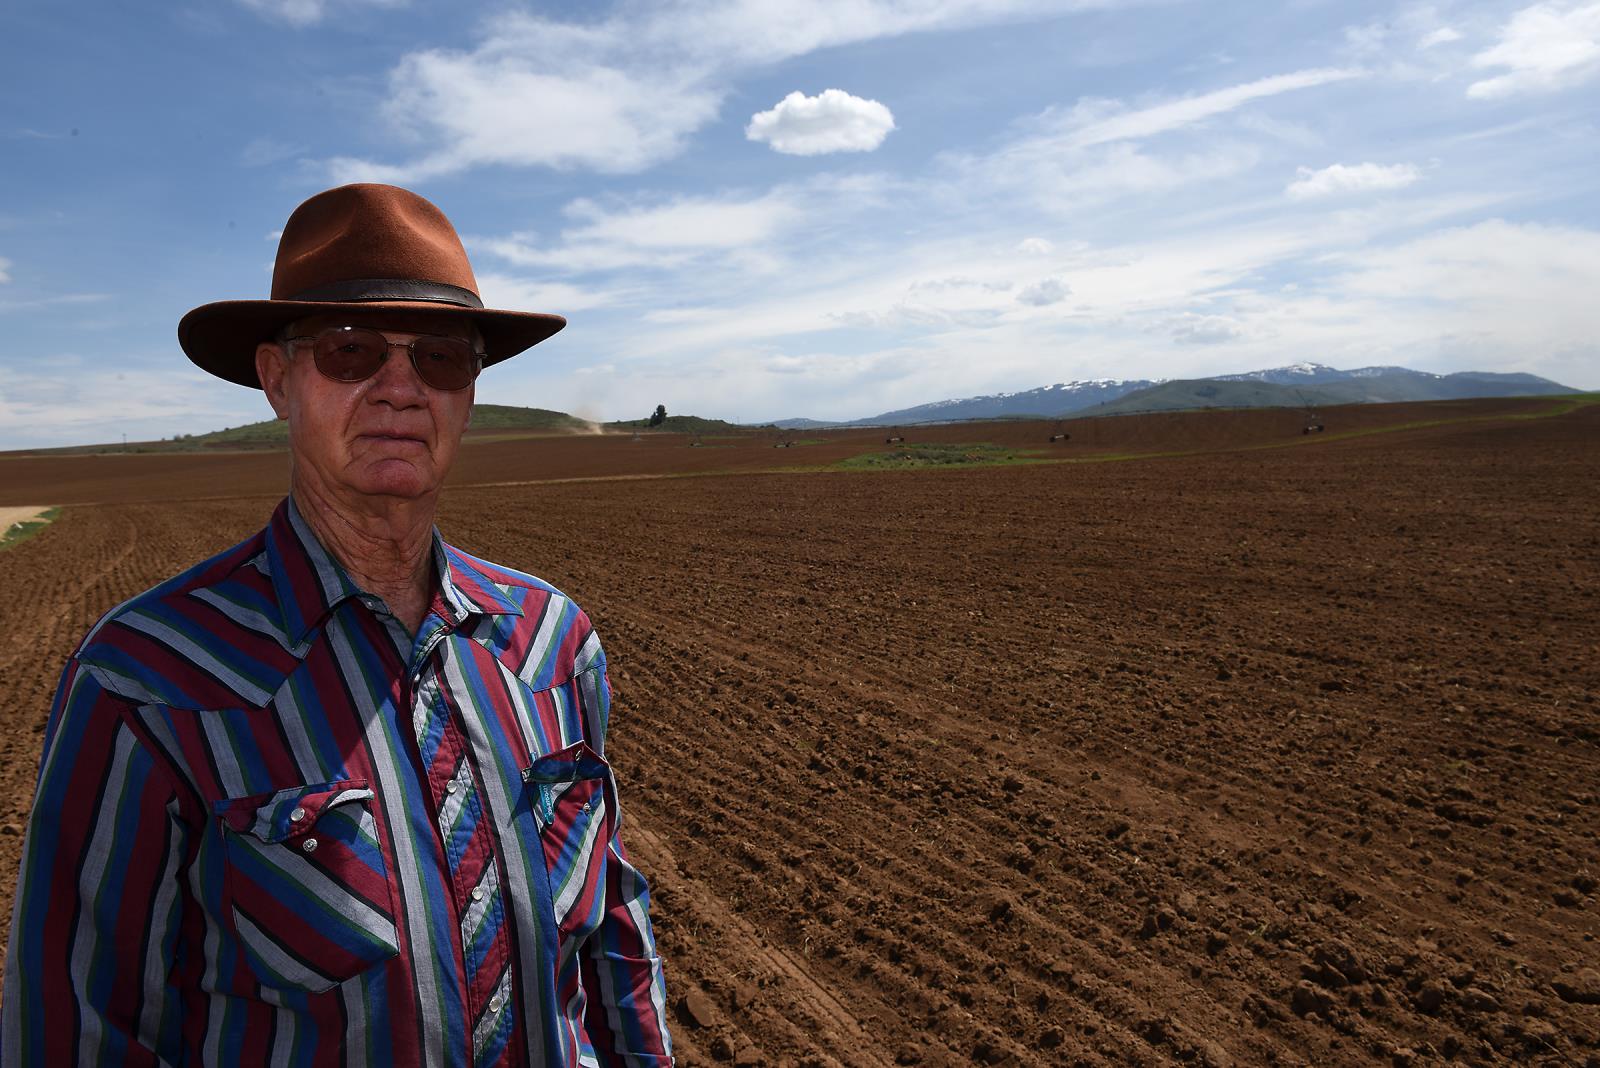 Don McFarland stands in a field at his Little Camas Ranch where a herd of elk damaged his organic grain crop. One of his organic potato fields, visible in the background, also suffered crop damage from the elk during the 2018 season.